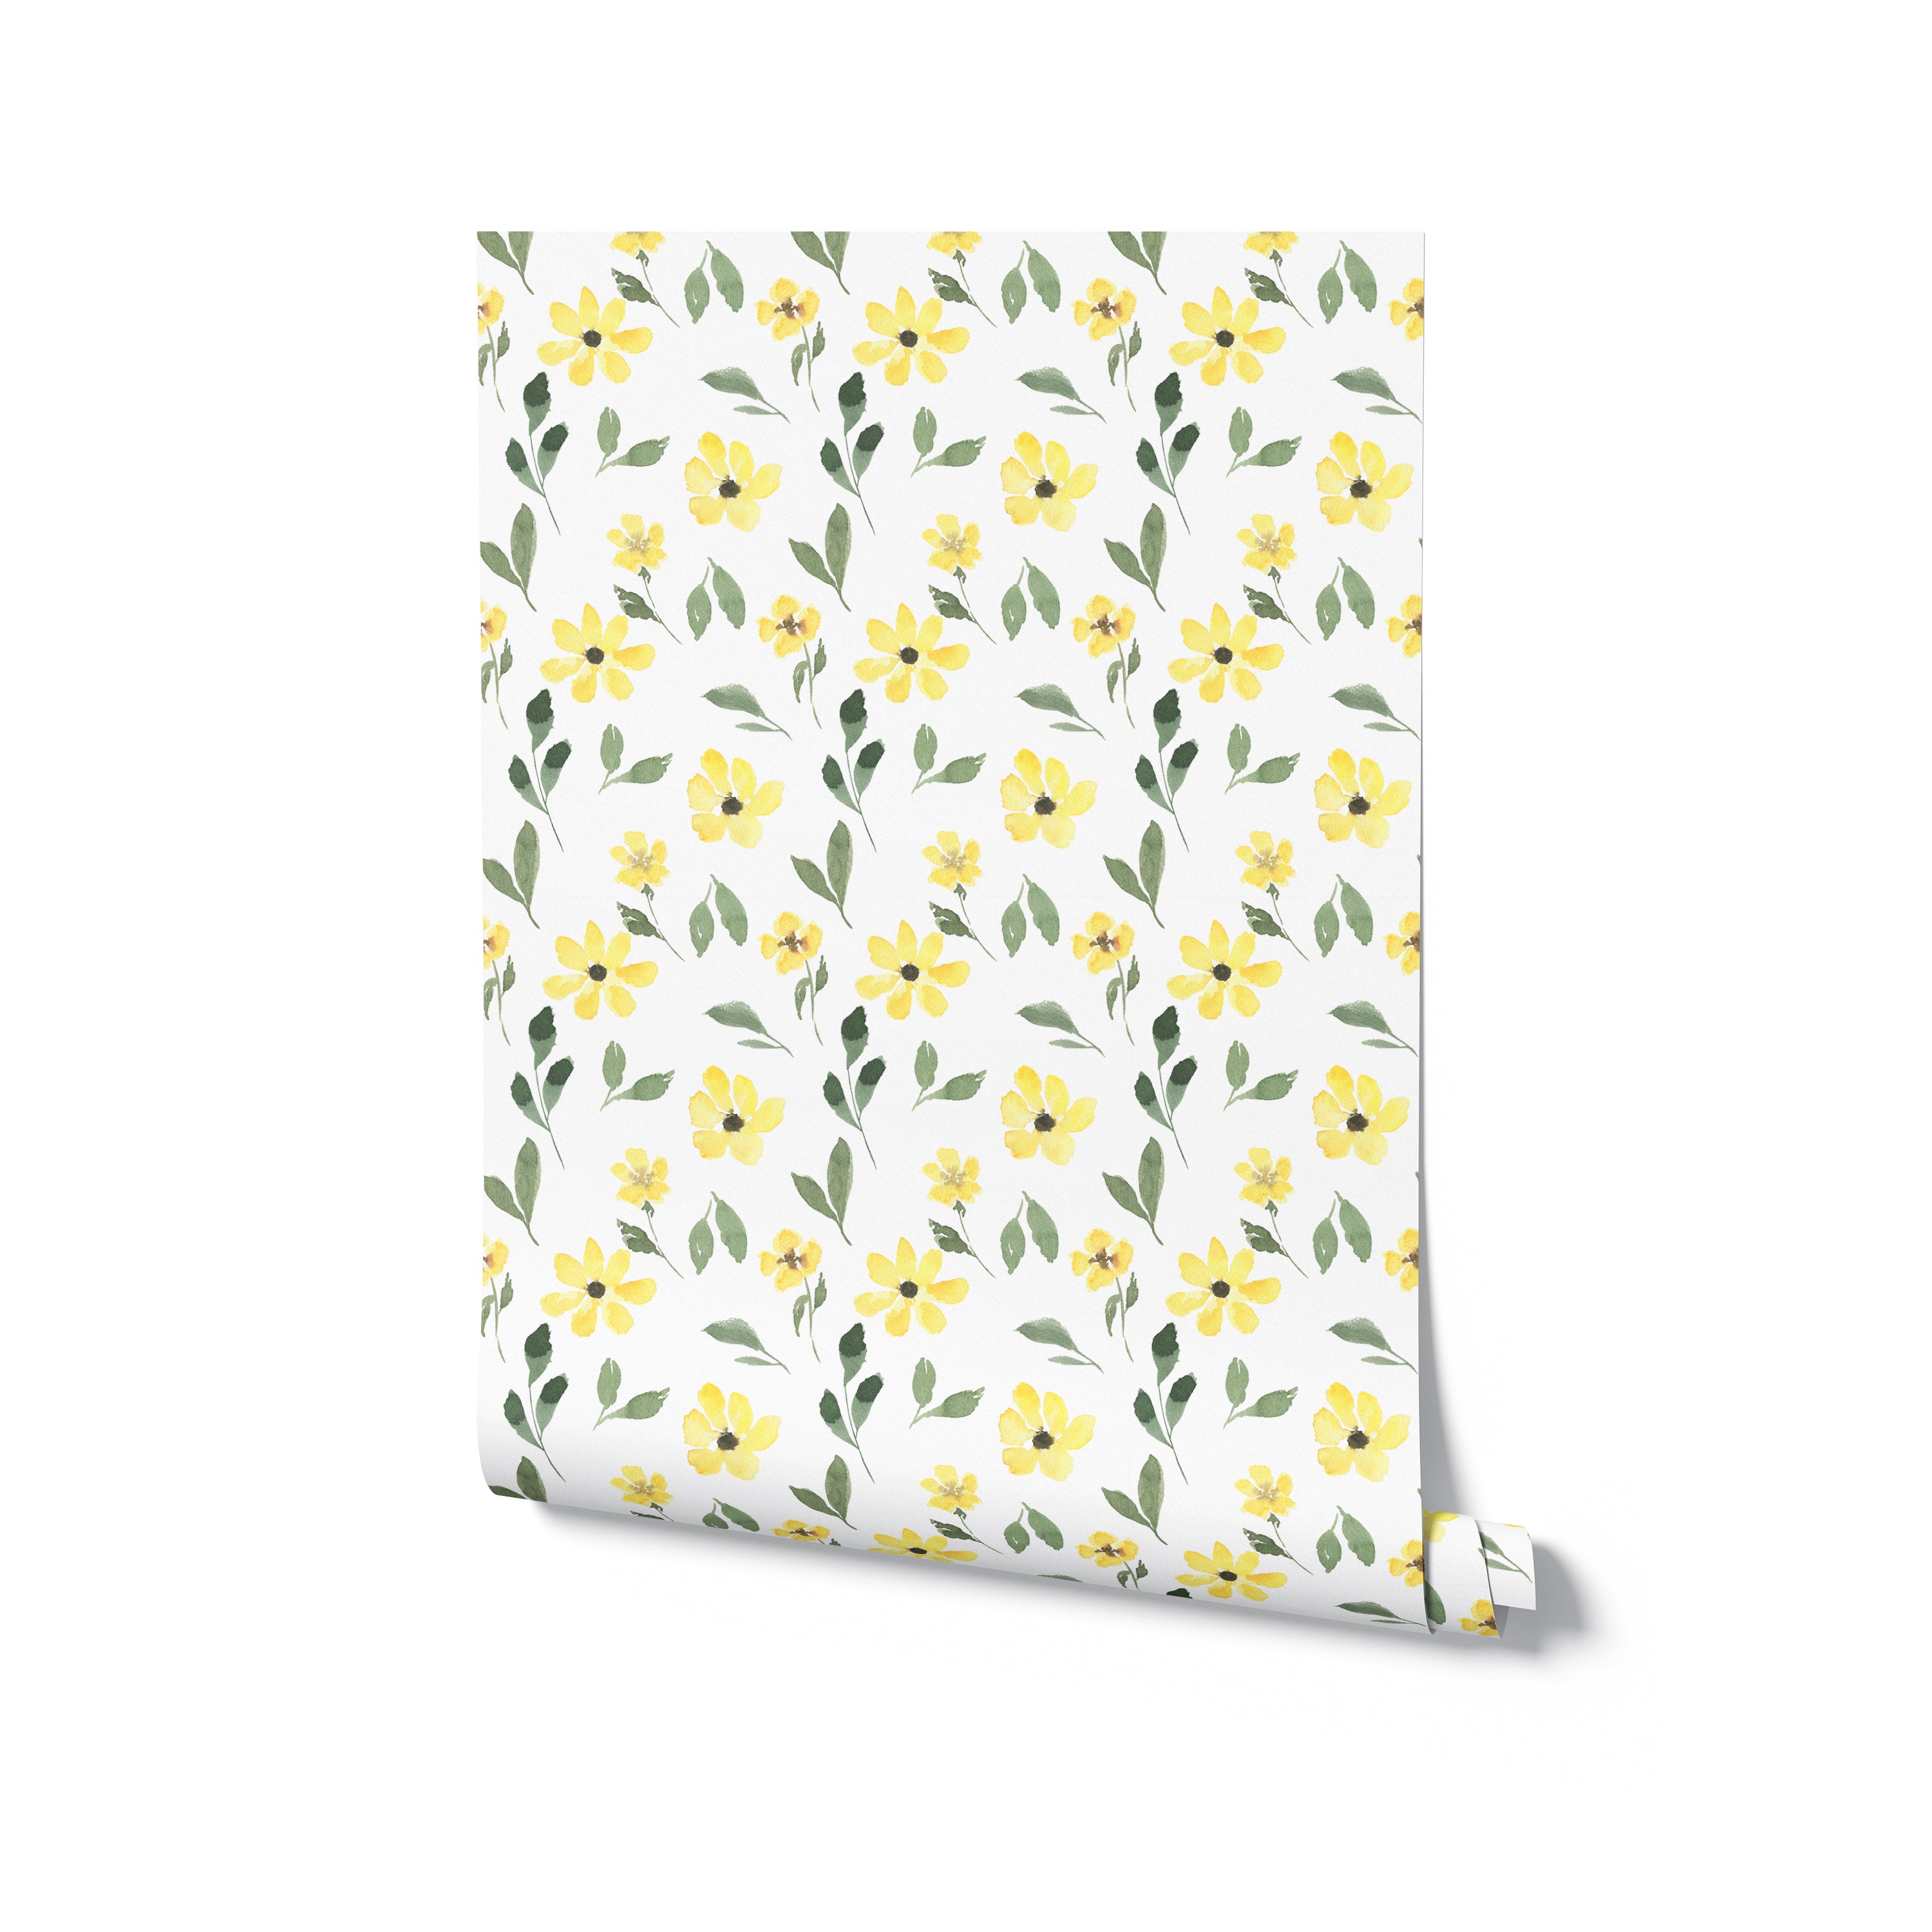 Roll of Yellow Spring Wallpaper featuring a watercolor pattern of yellow flowers and green leaves on a white background.